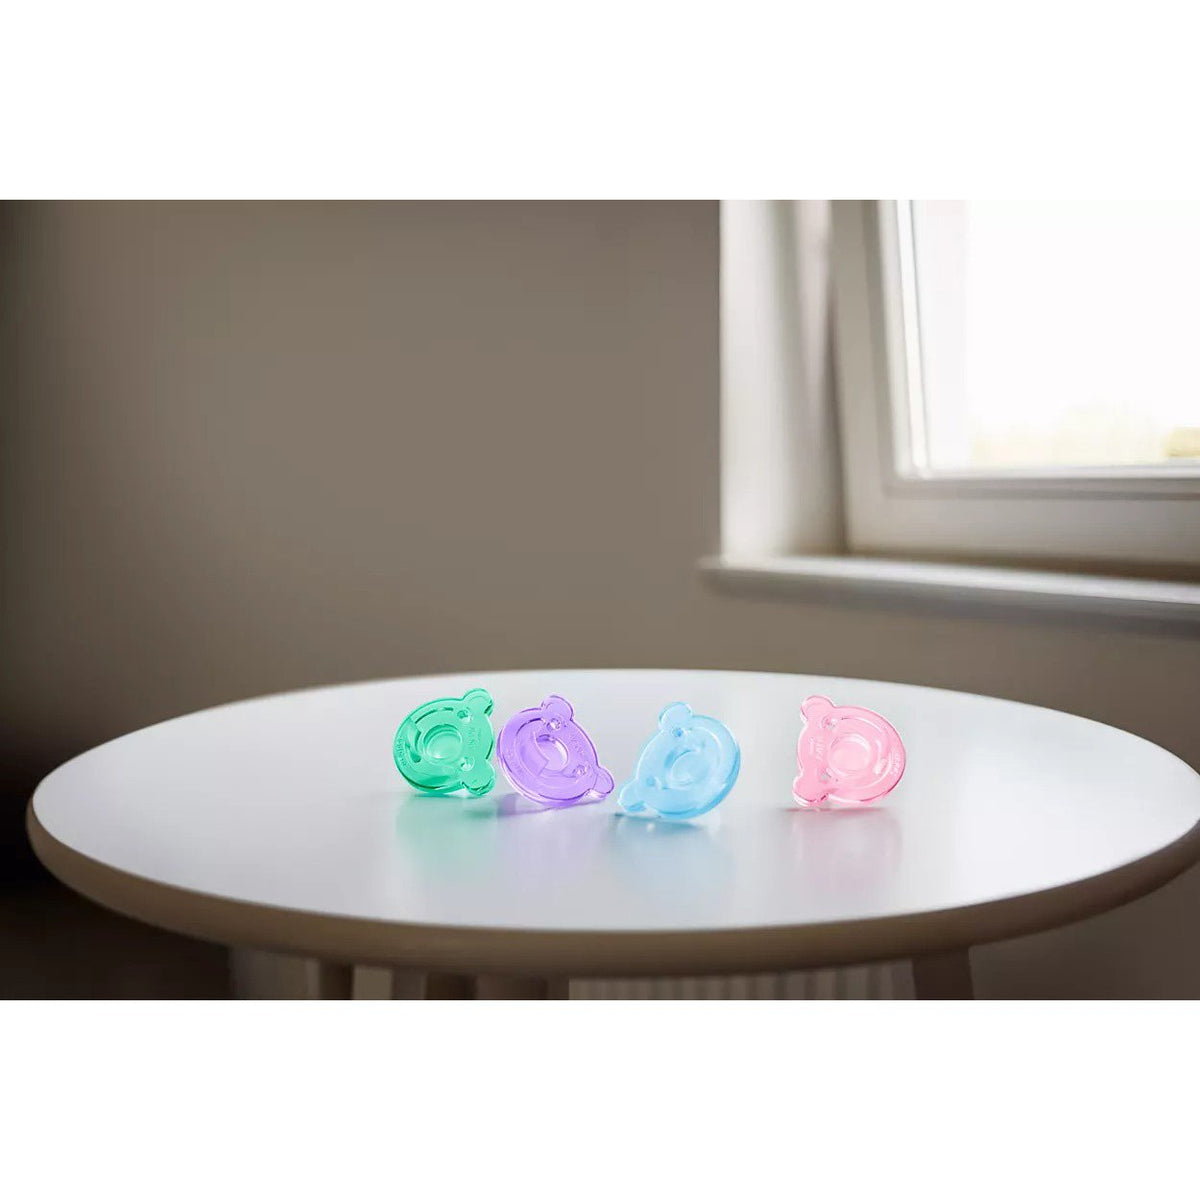 philips-avent-soothie-shapes-pacifier- (10)